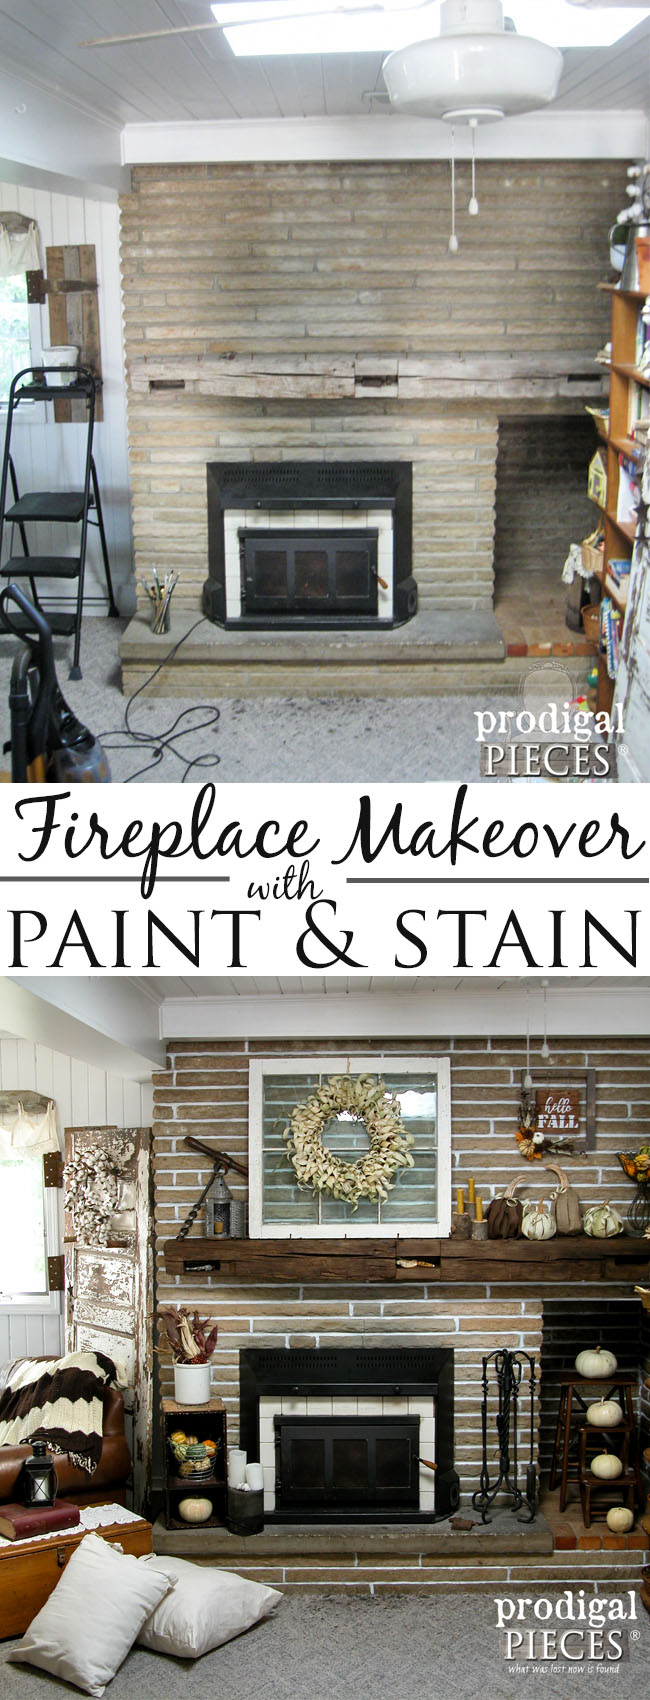 Farmhouse Fireplace Mantel Makeover with Paint & Stain by Prodigal Pieces | www.prodigalpieces.com